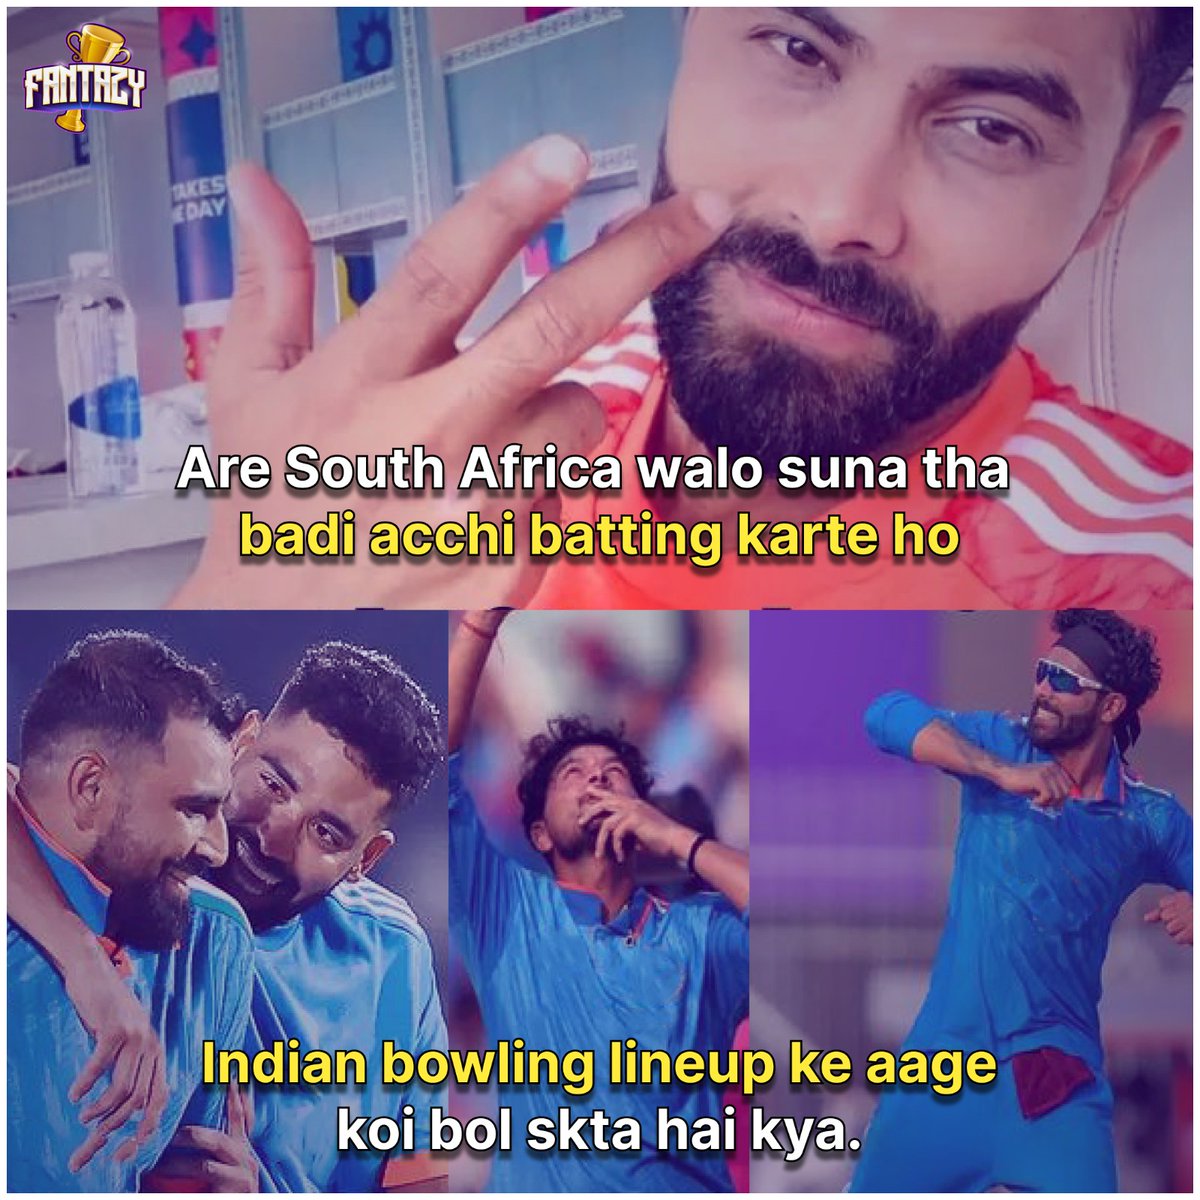 India's Bowling 🔥🔥🔥🔥 #Cricket #CricketWorldCup2023 #CricketTwitter #Safrica #India #TrendingNow #NewPost #cricketmeme #bowling